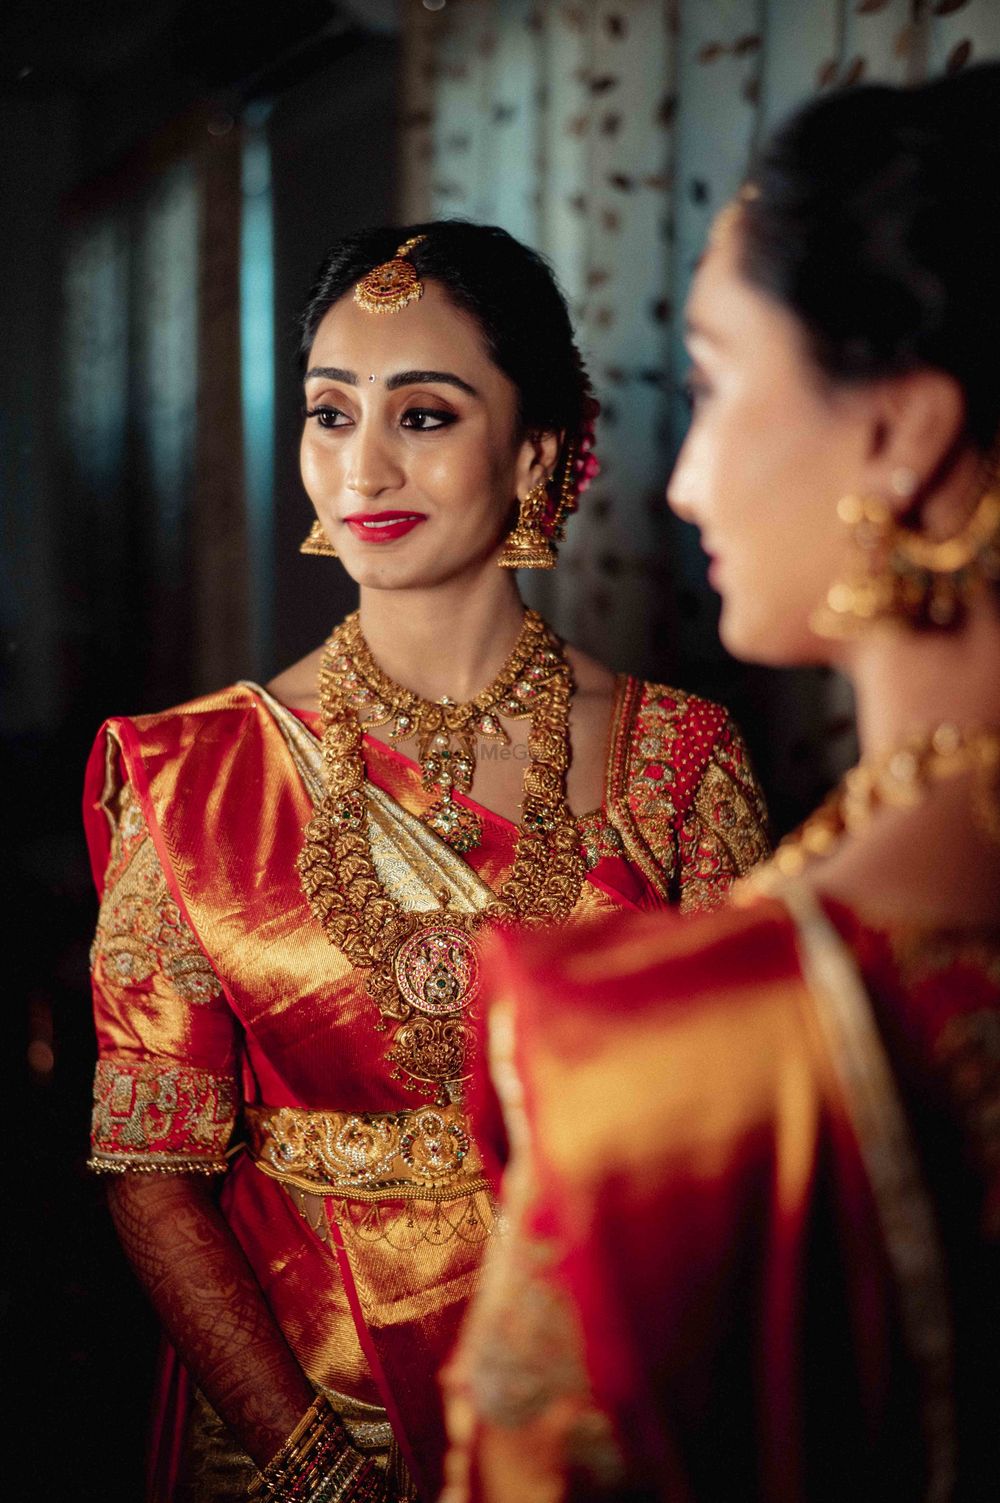 Photo of Bride wearing red and white saree with temple jewellery.